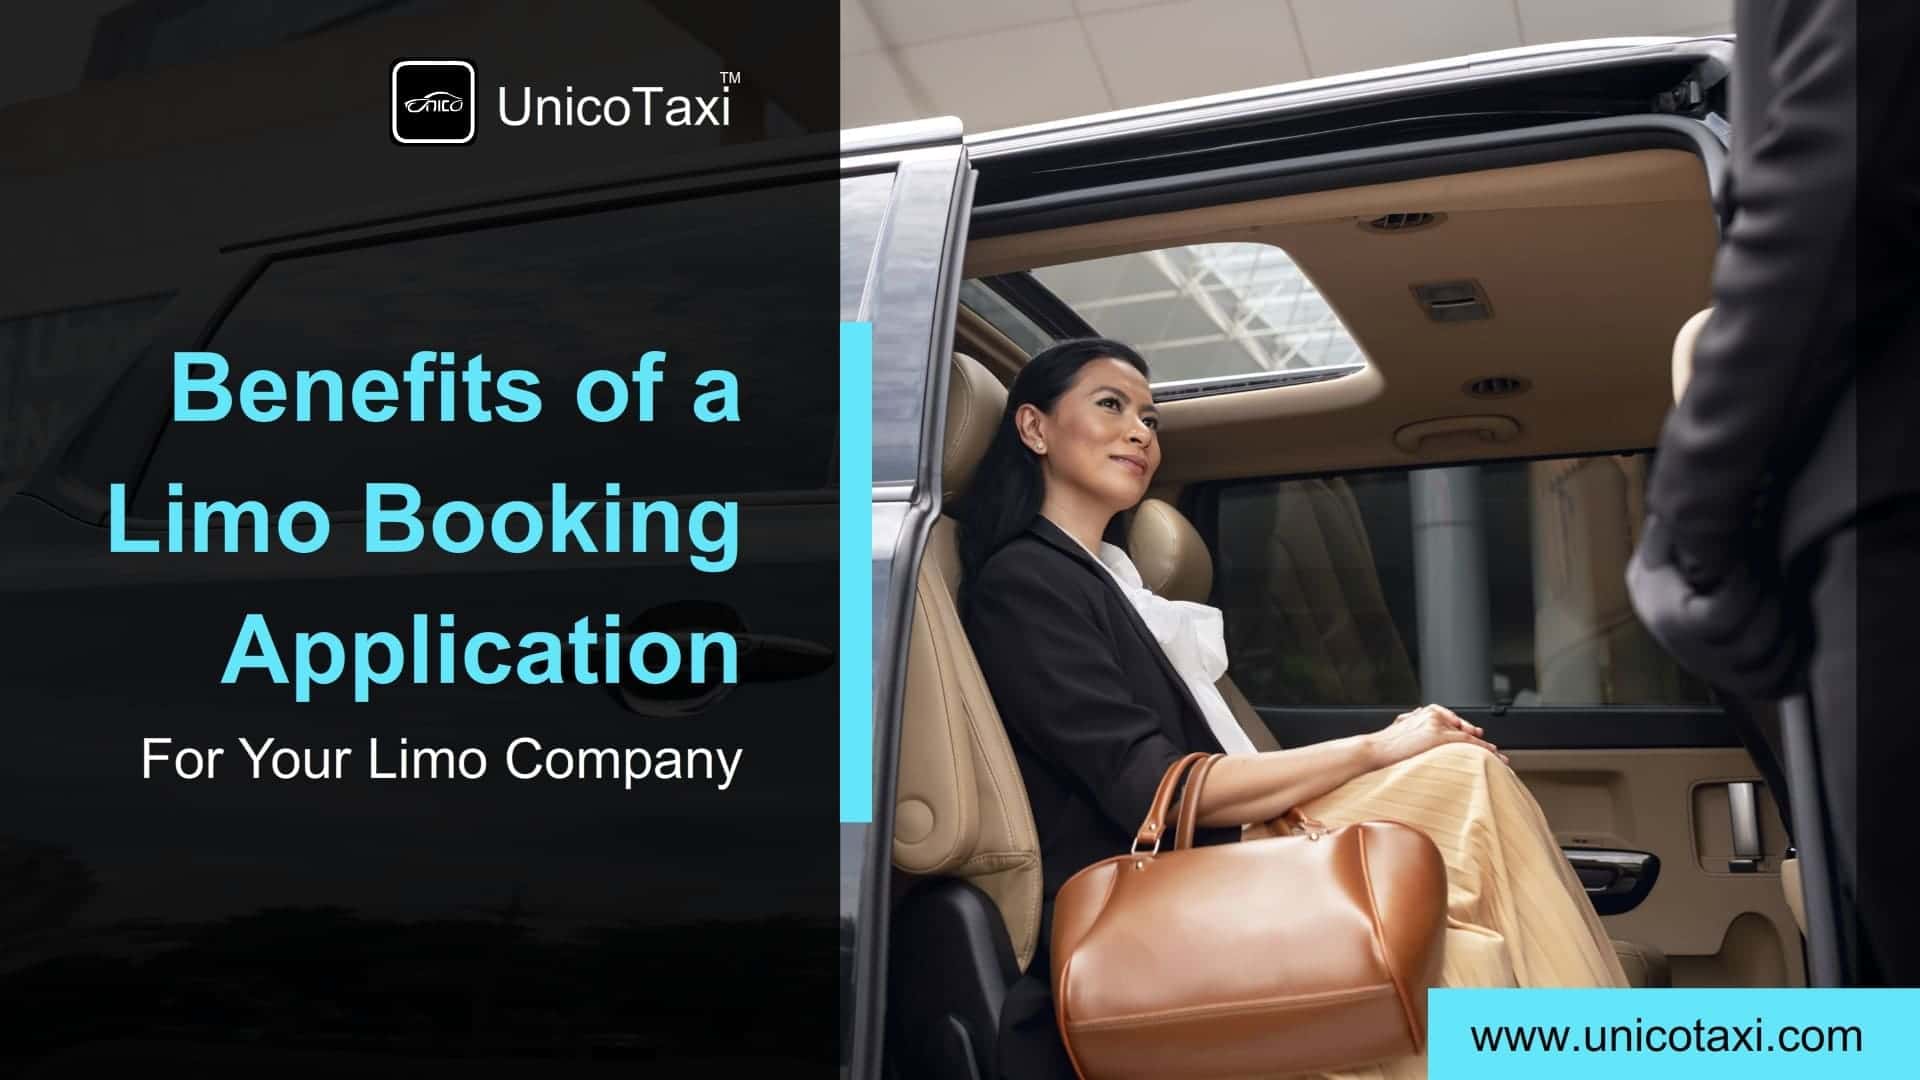 The Benefits of a Limo Booking App for Your Limo Company